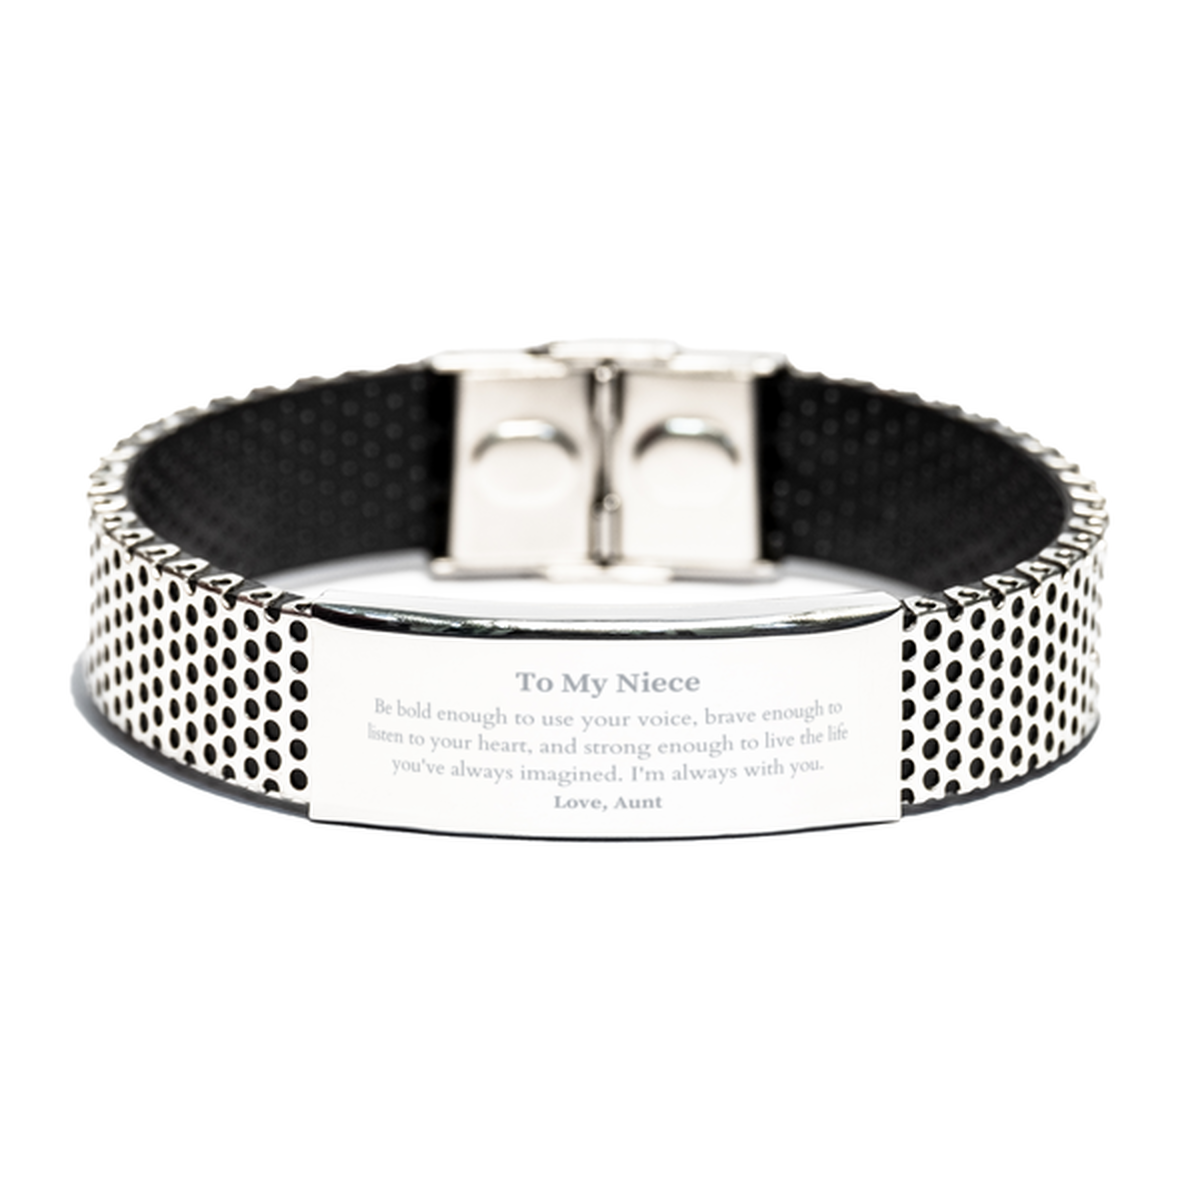 Keepsake Niece Stainless Steel Bracelet Gift Idea Graduation Christmas Birthday Niece from Aunt, Niece Be bold enough to use your voice, brave enough to listen to your heart. Love, Aunt